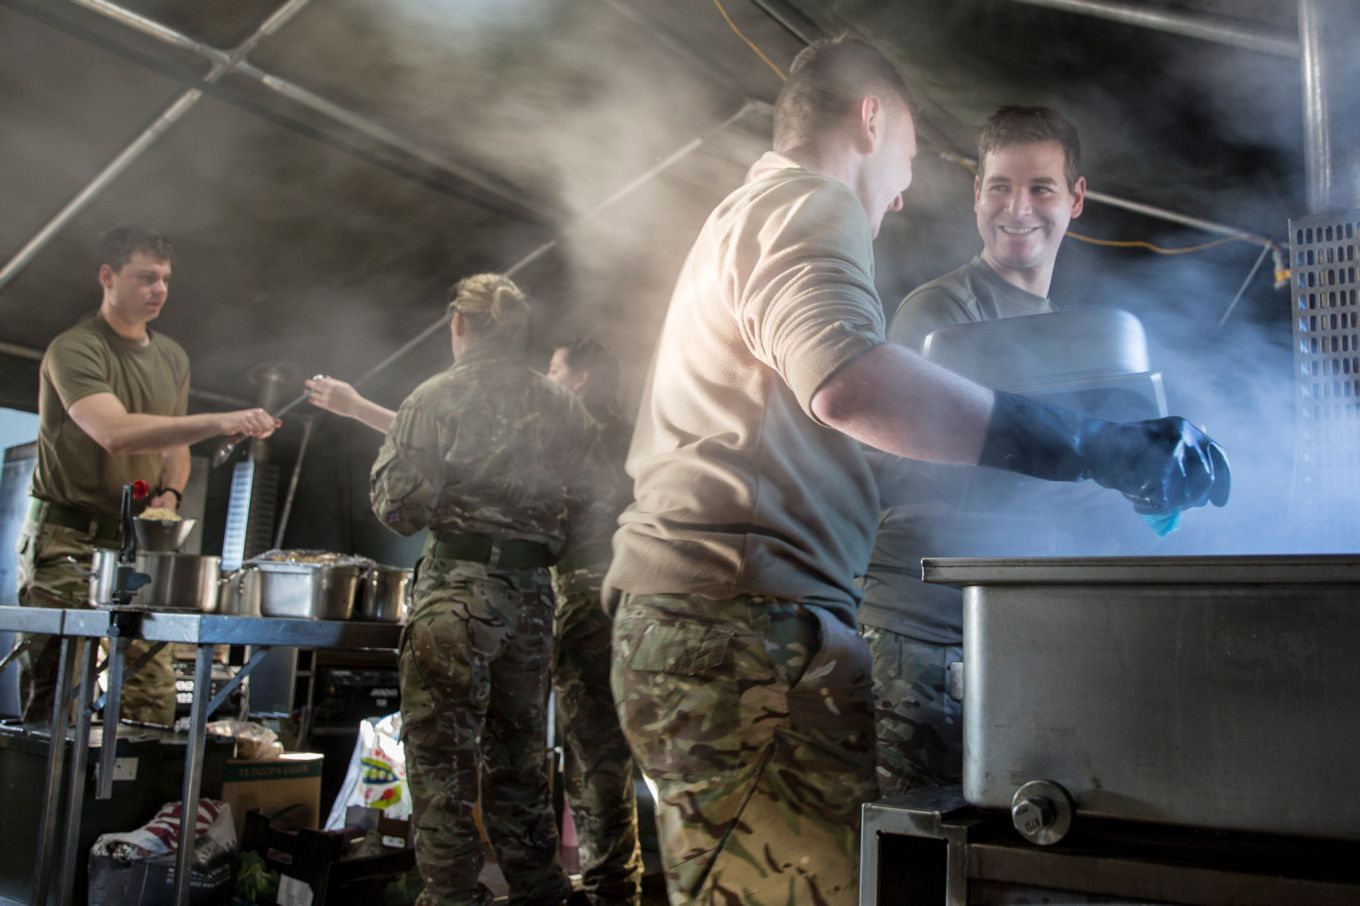 The deployed skills course, run by Sgt Harland, where trainee RAF Chefs are taught to work in a field kitchen